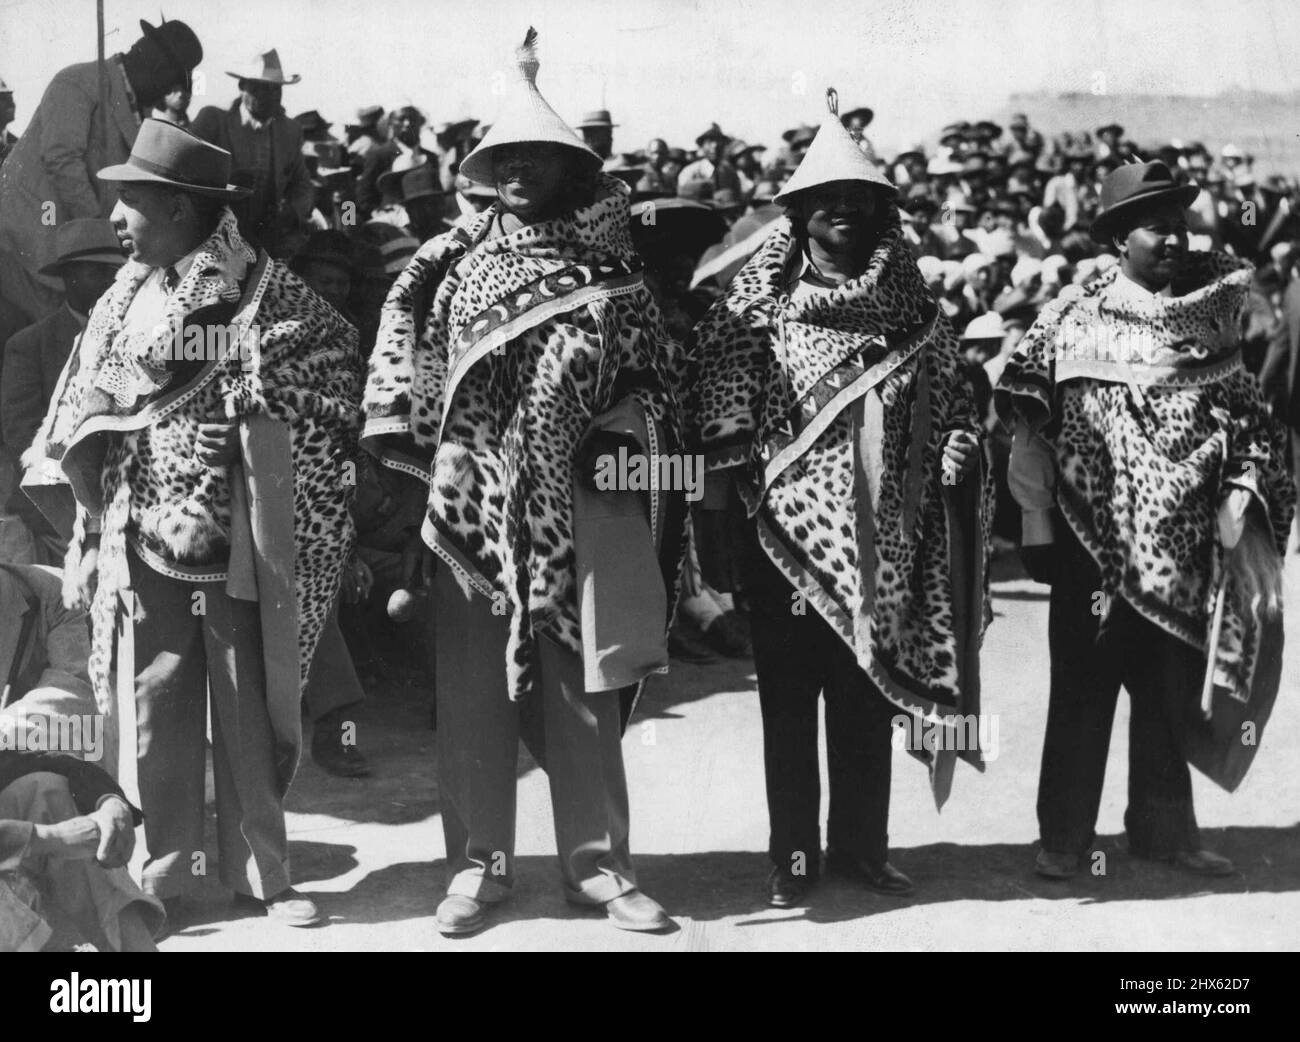 The Royal Family In Basutoland -- The four senior chiefs in their leopard skins make very colourful figures at the Royal Pitso held at Maseru on March 13th. The Royal Pitso arranged in honour of the visit of their Majesties and the two Princesses was attended by a huge concourse of Basuto natives headed by their Regent, Paramount Chieftainess Mantsebo Seeiso, many chiefs and thousands of natives. It is estimated that about 80,000 were assembled to greet the royal party. They had been arriving f Stock Photo